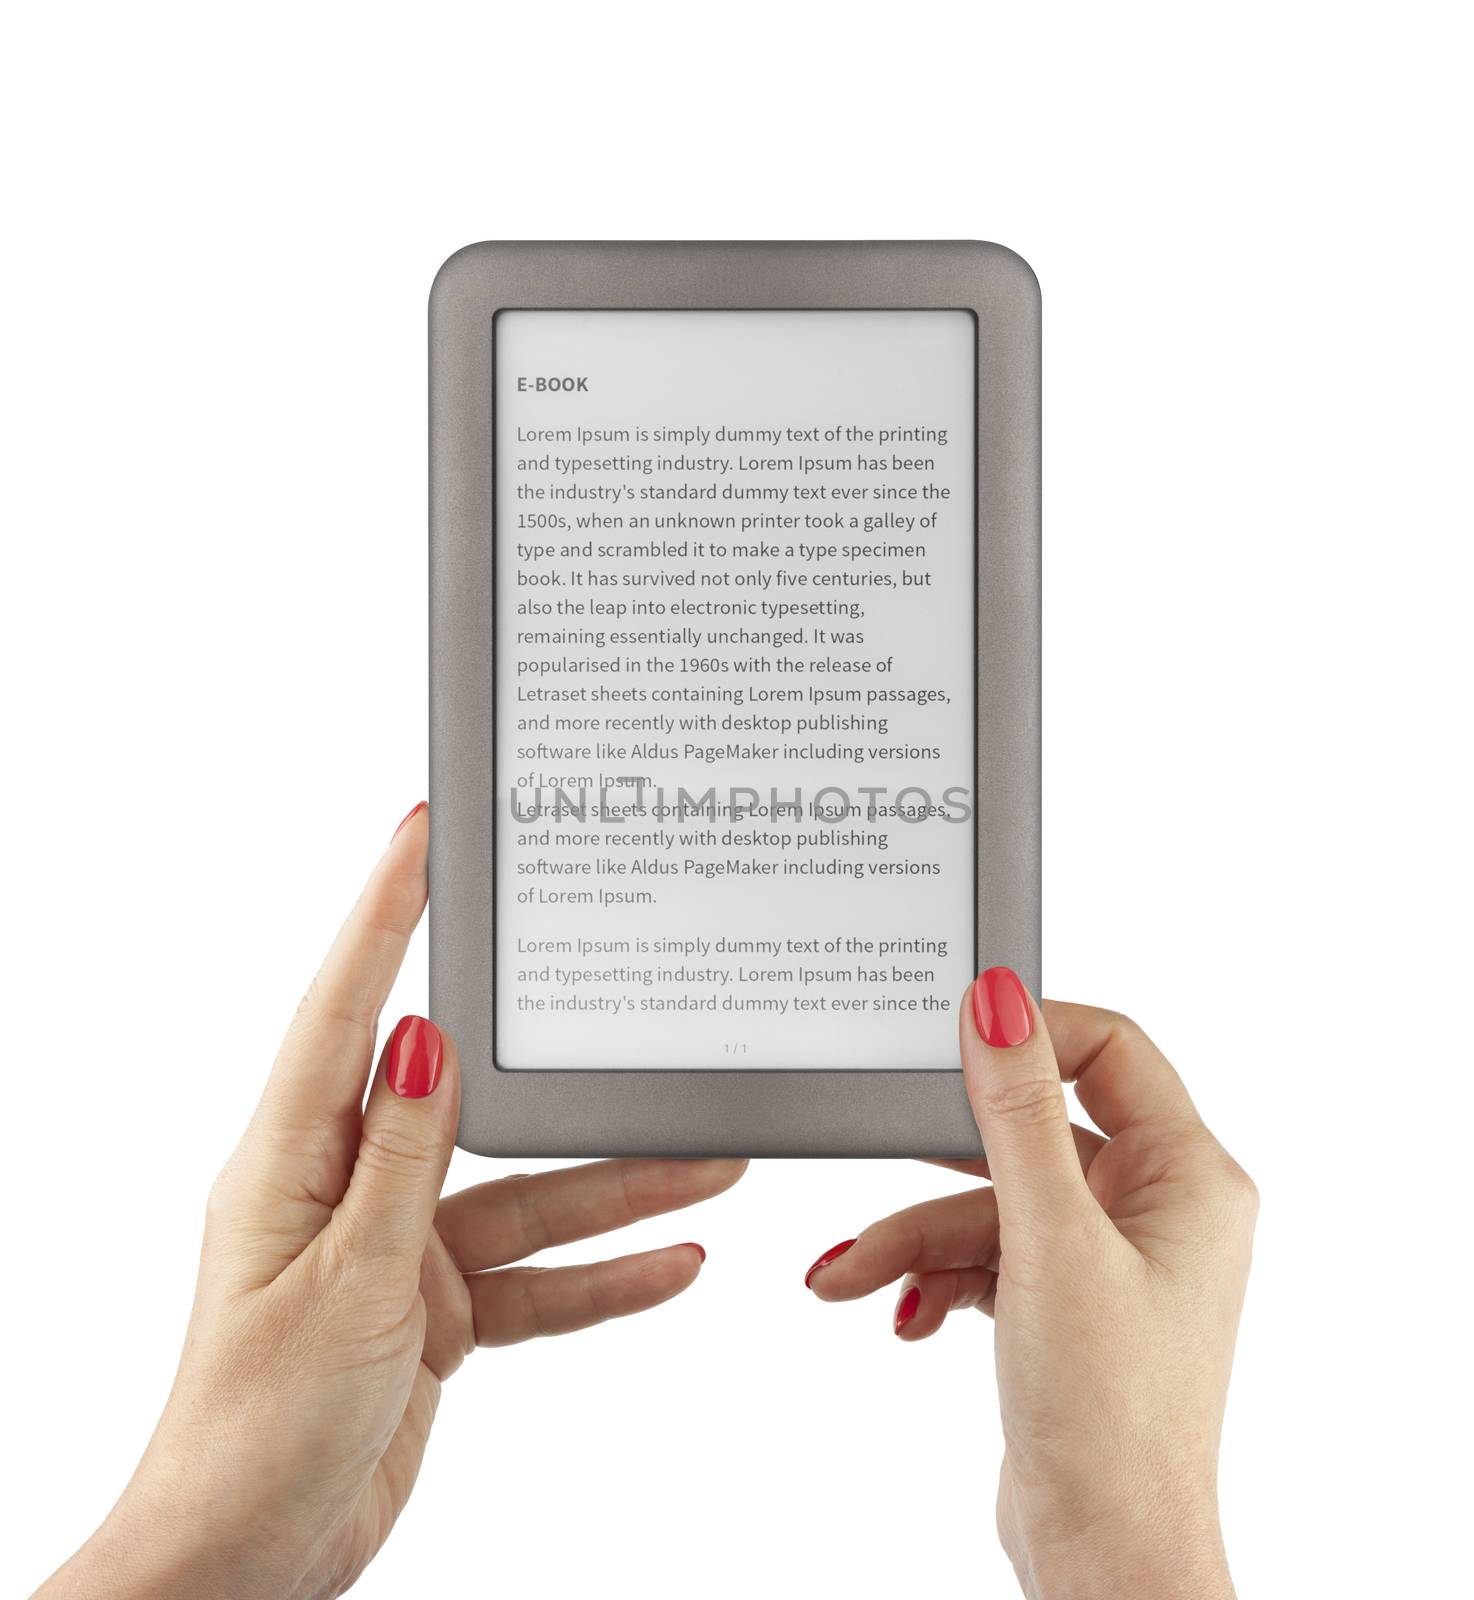 Holding E-book reader in hands. Include clipping path for screen and book with hands. LOREM IPSUM text on e-book screen.